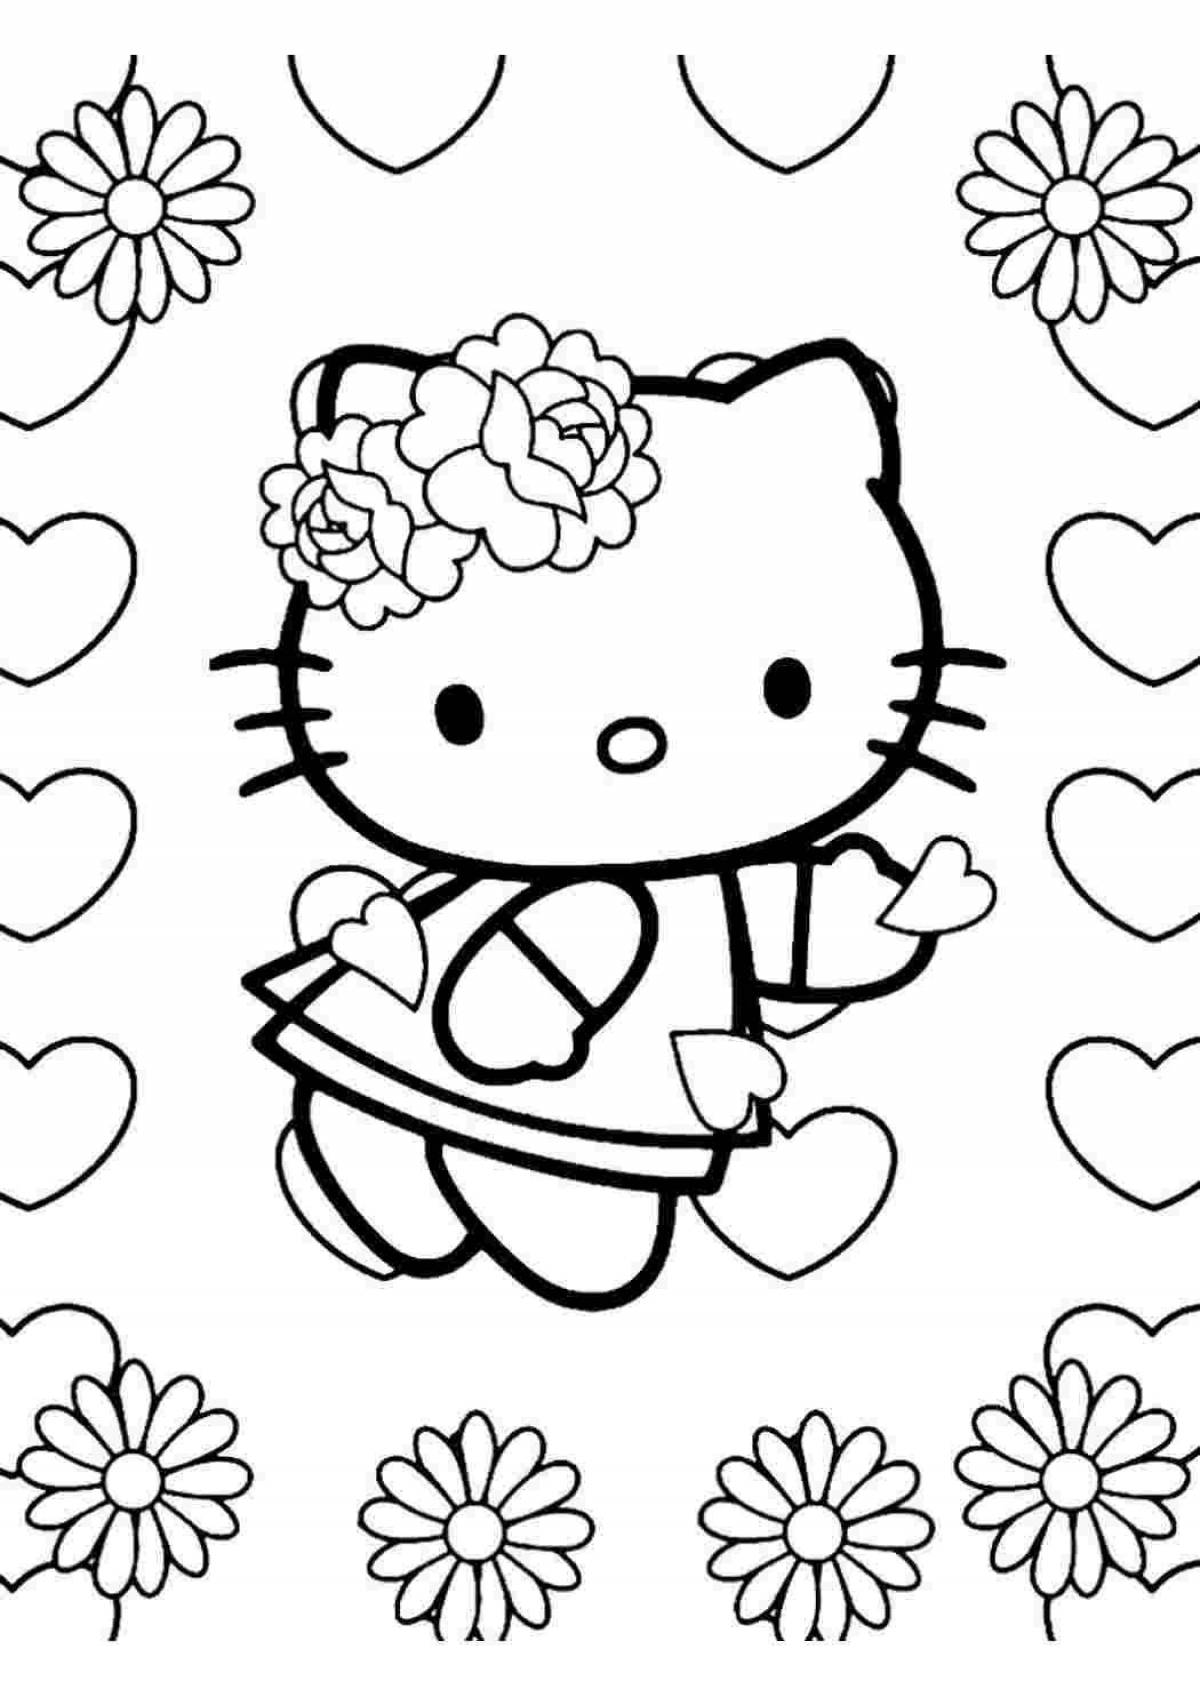 Aster kitty coloring book